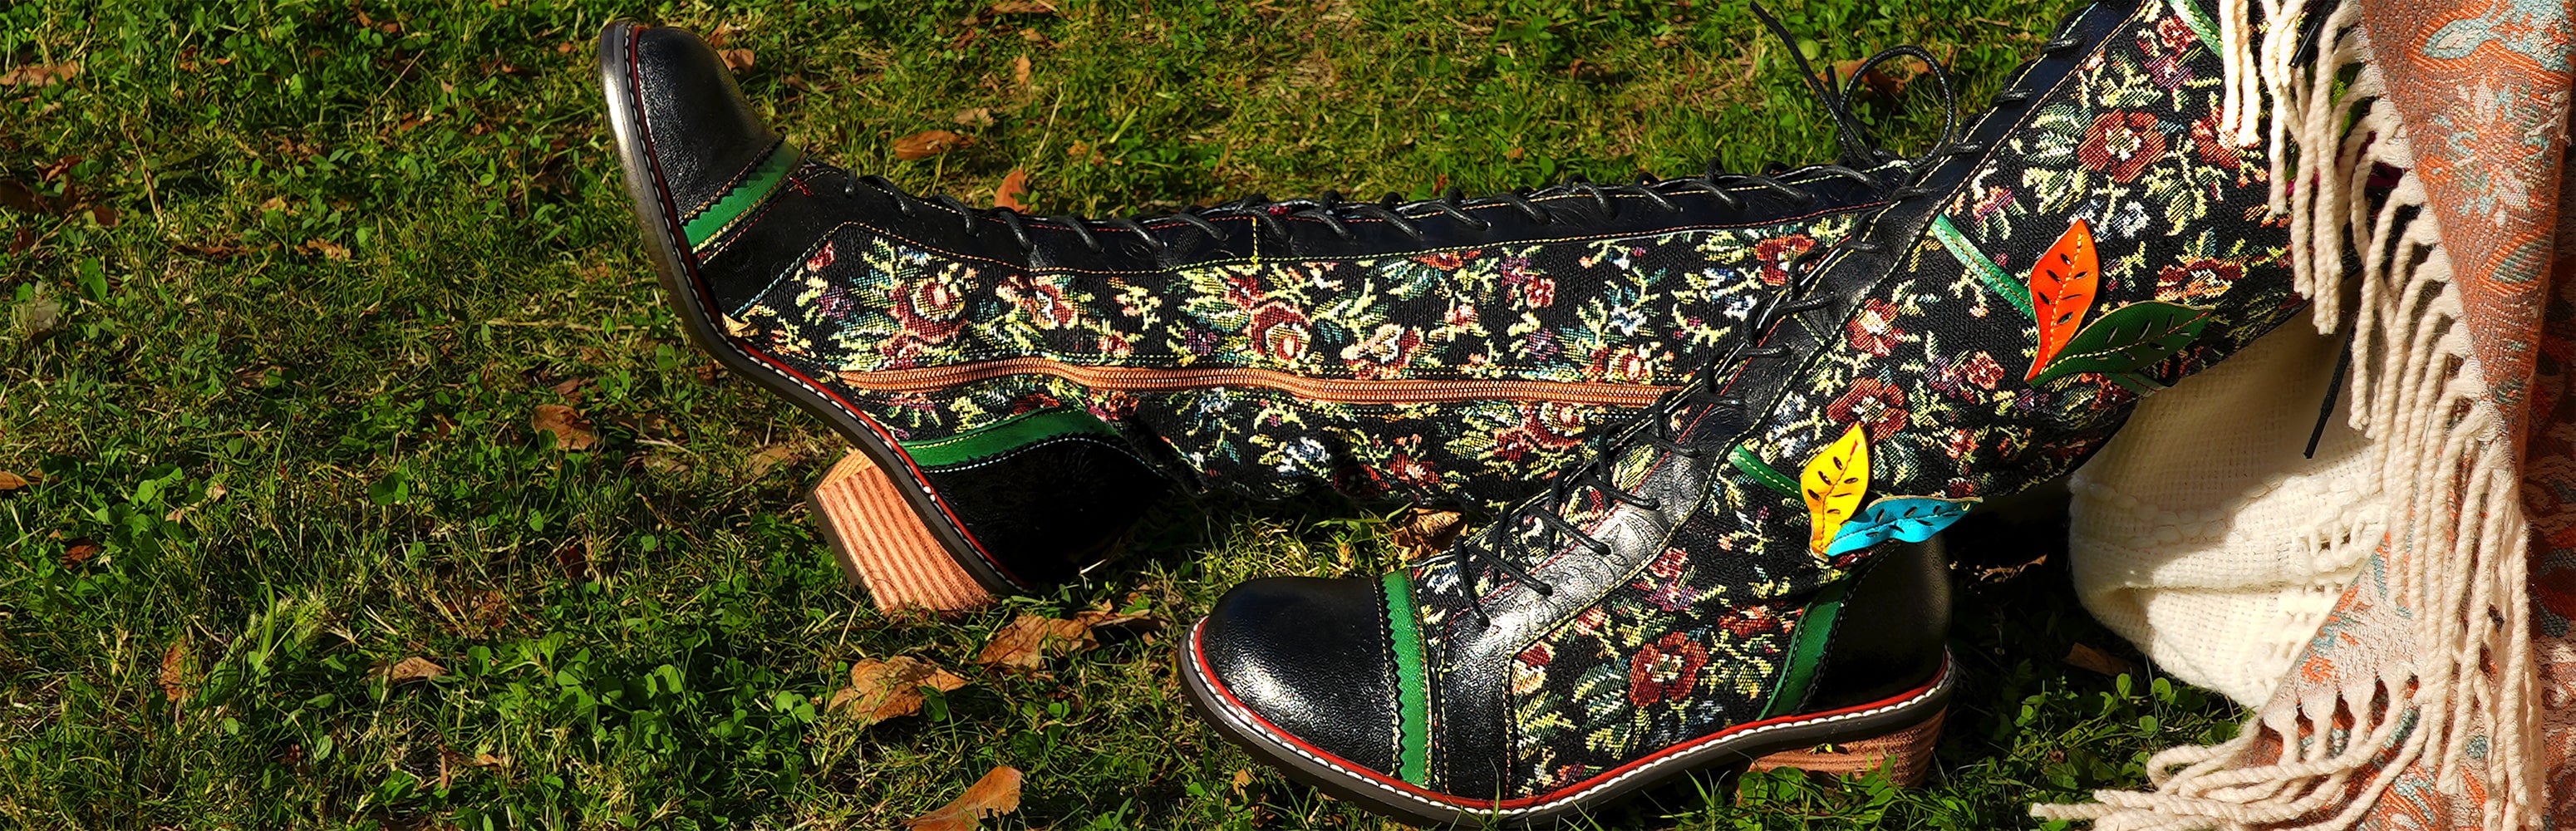 Hand painted boots  Shoe refashion, Boho boots, Painted shoes